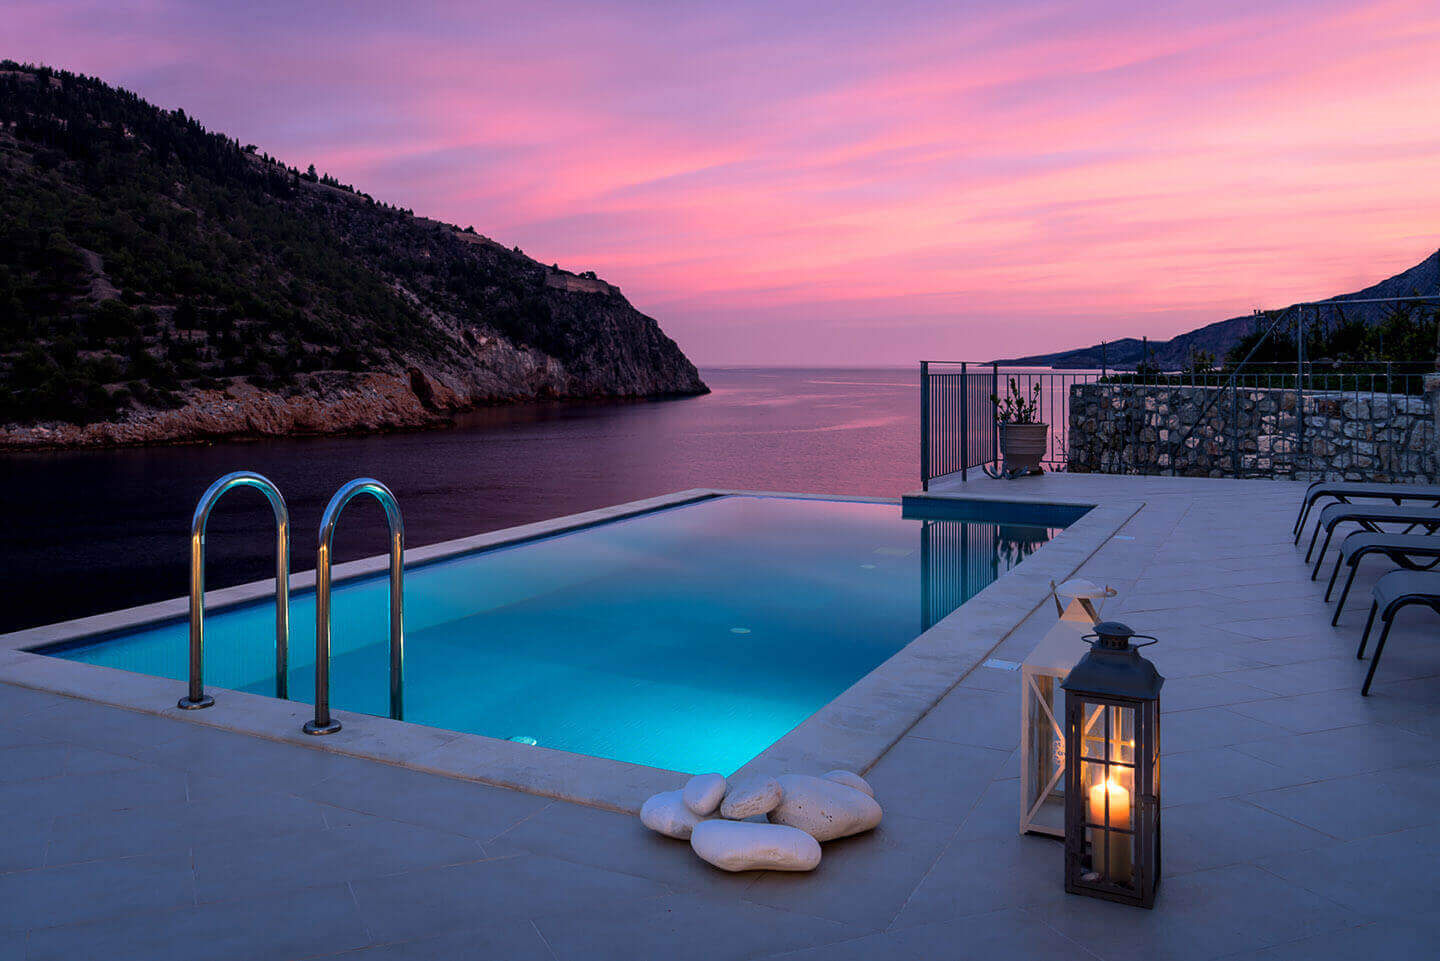 Assos View - magnificent view of the sea and the skyline from the villa's pool